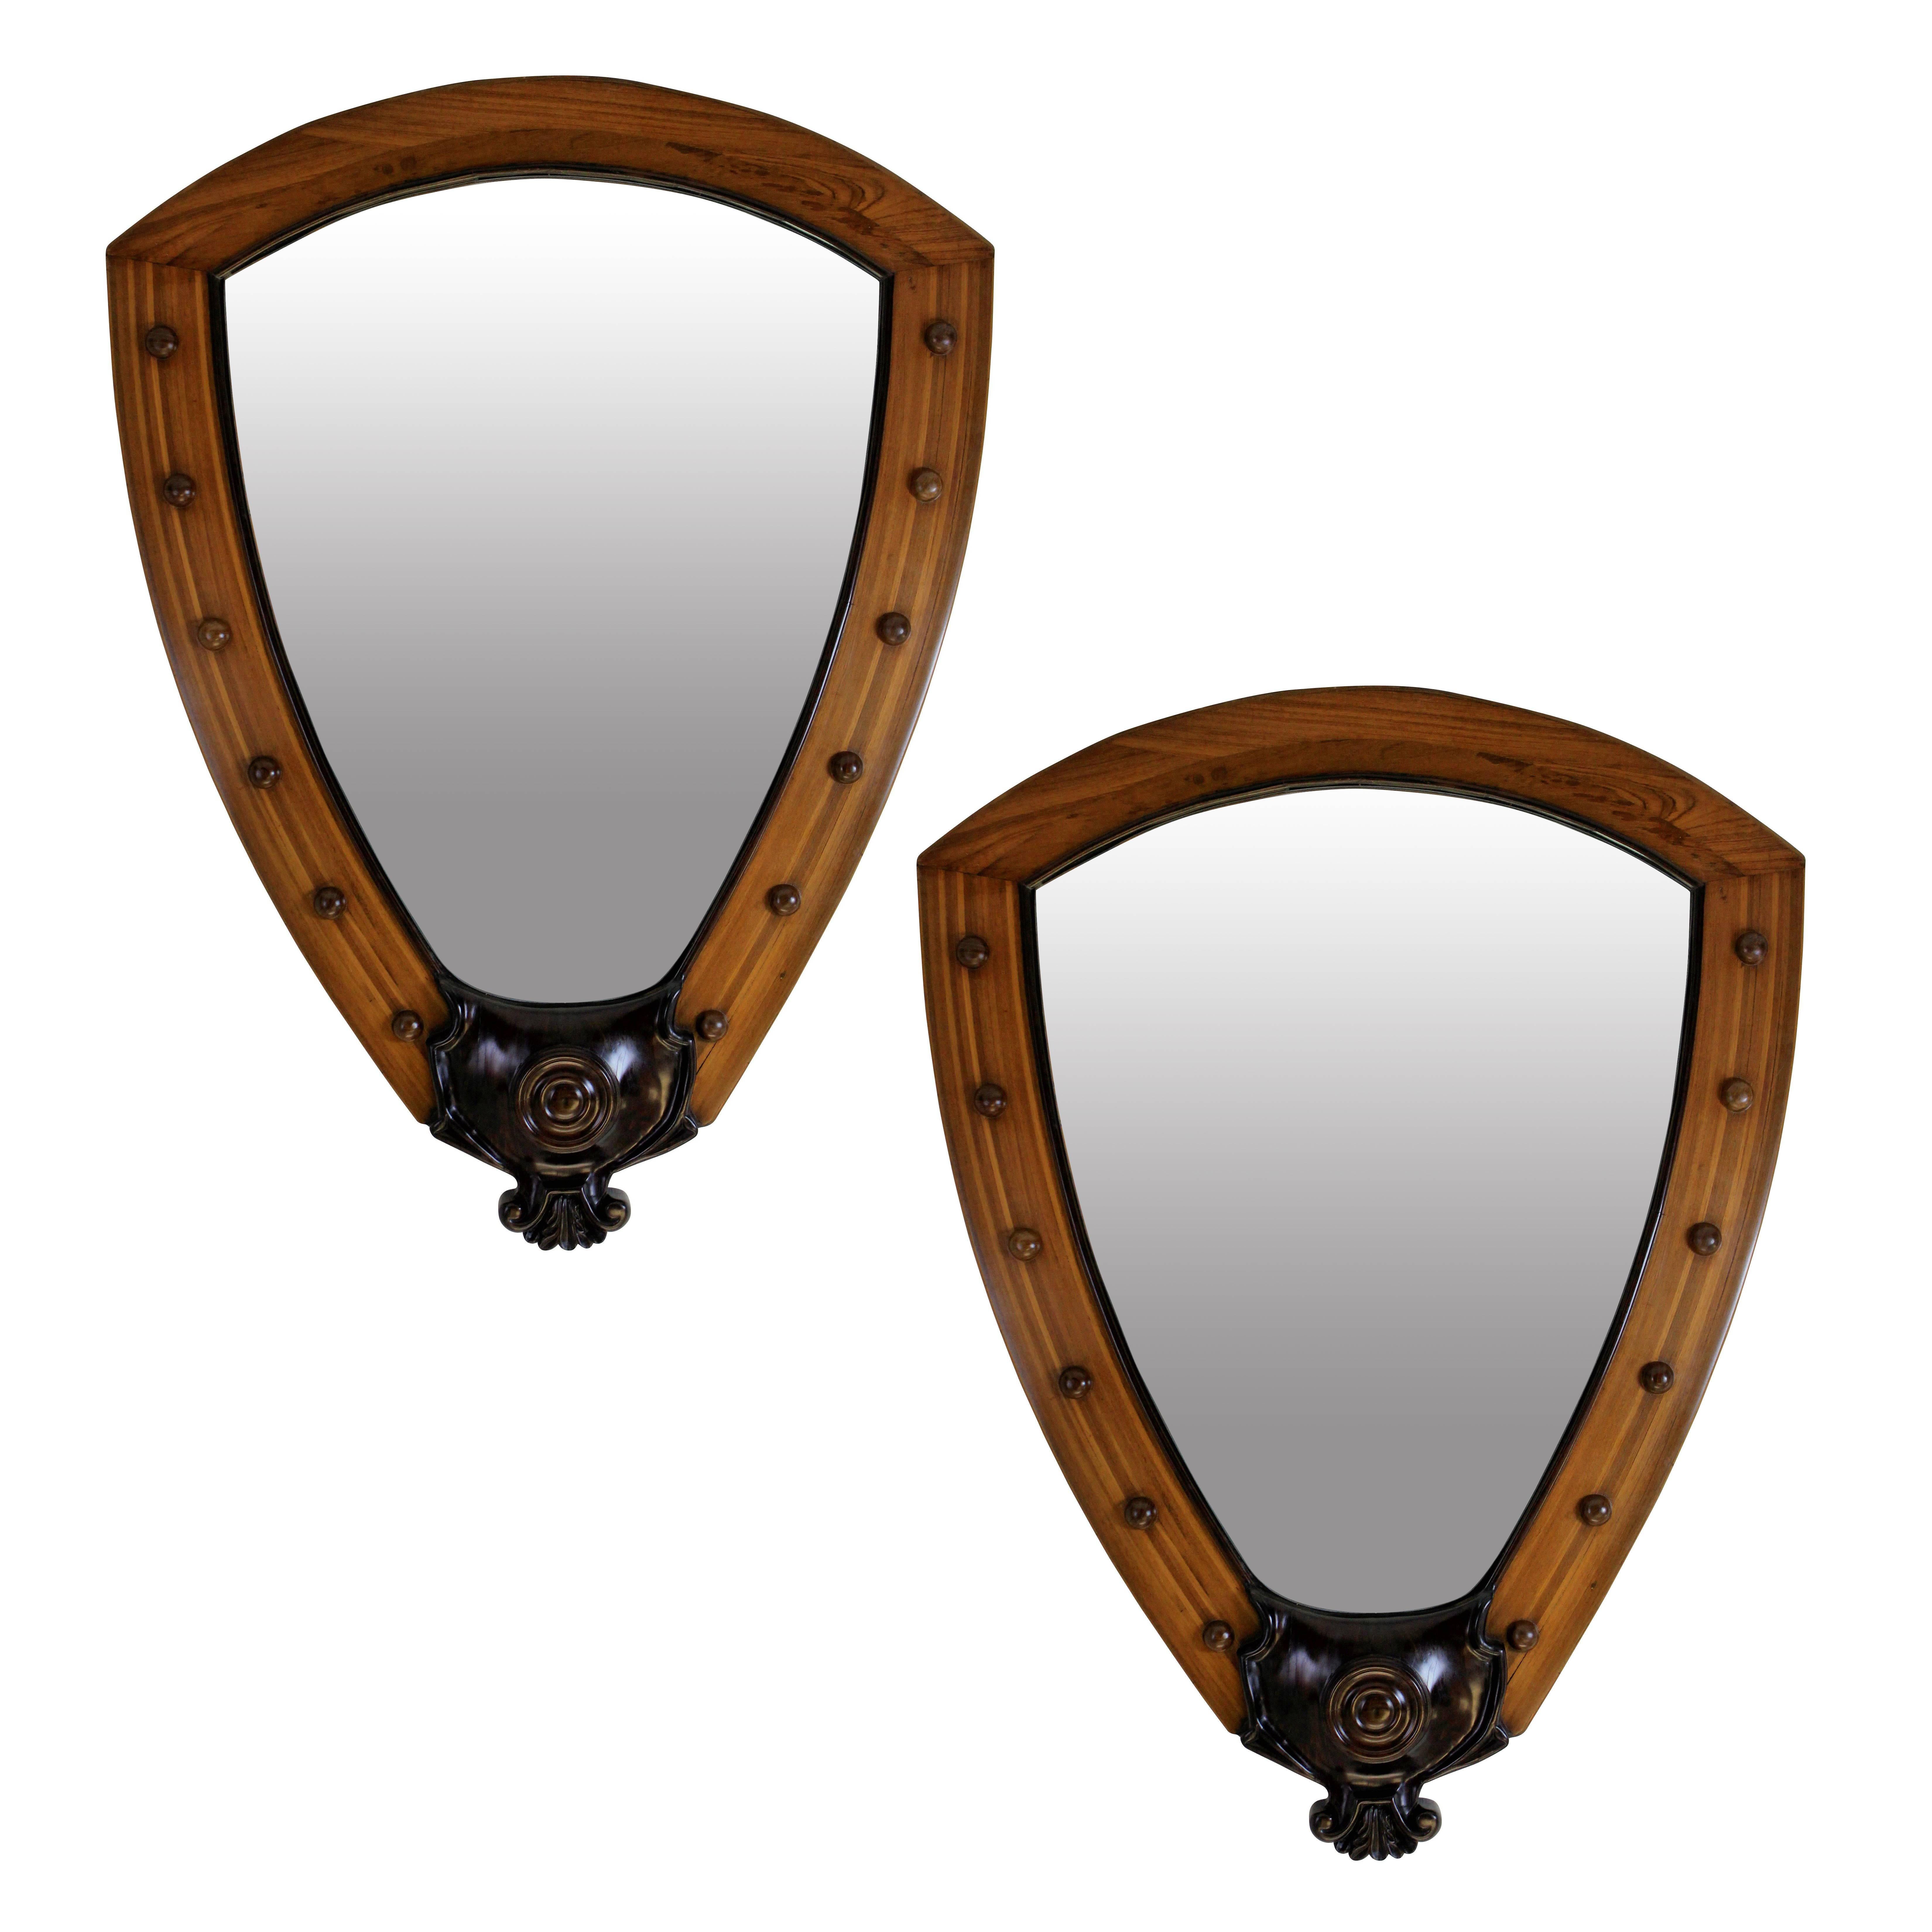 A rare pair of English mirrors of large proportions, from a white star line ocean liner interior. The quality and weight is matched by the very unusual shape and design. They are in solid teak and rosewood, with oak backs. Original mirror plates.
  